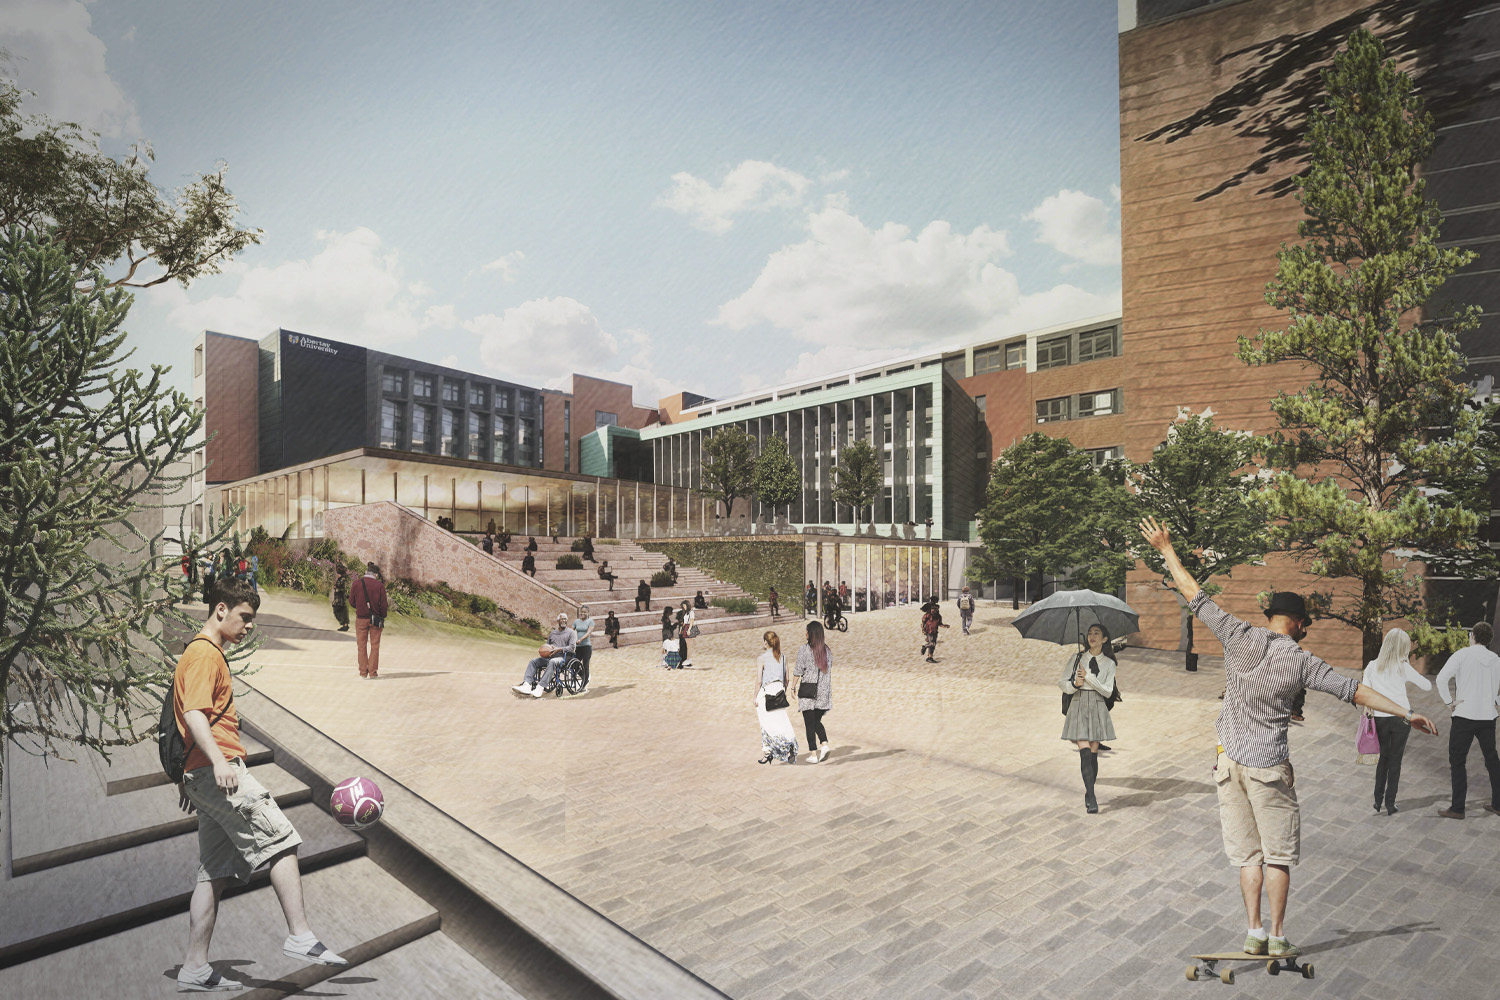 A possible health, wellbeing and social hub built on the main car park 